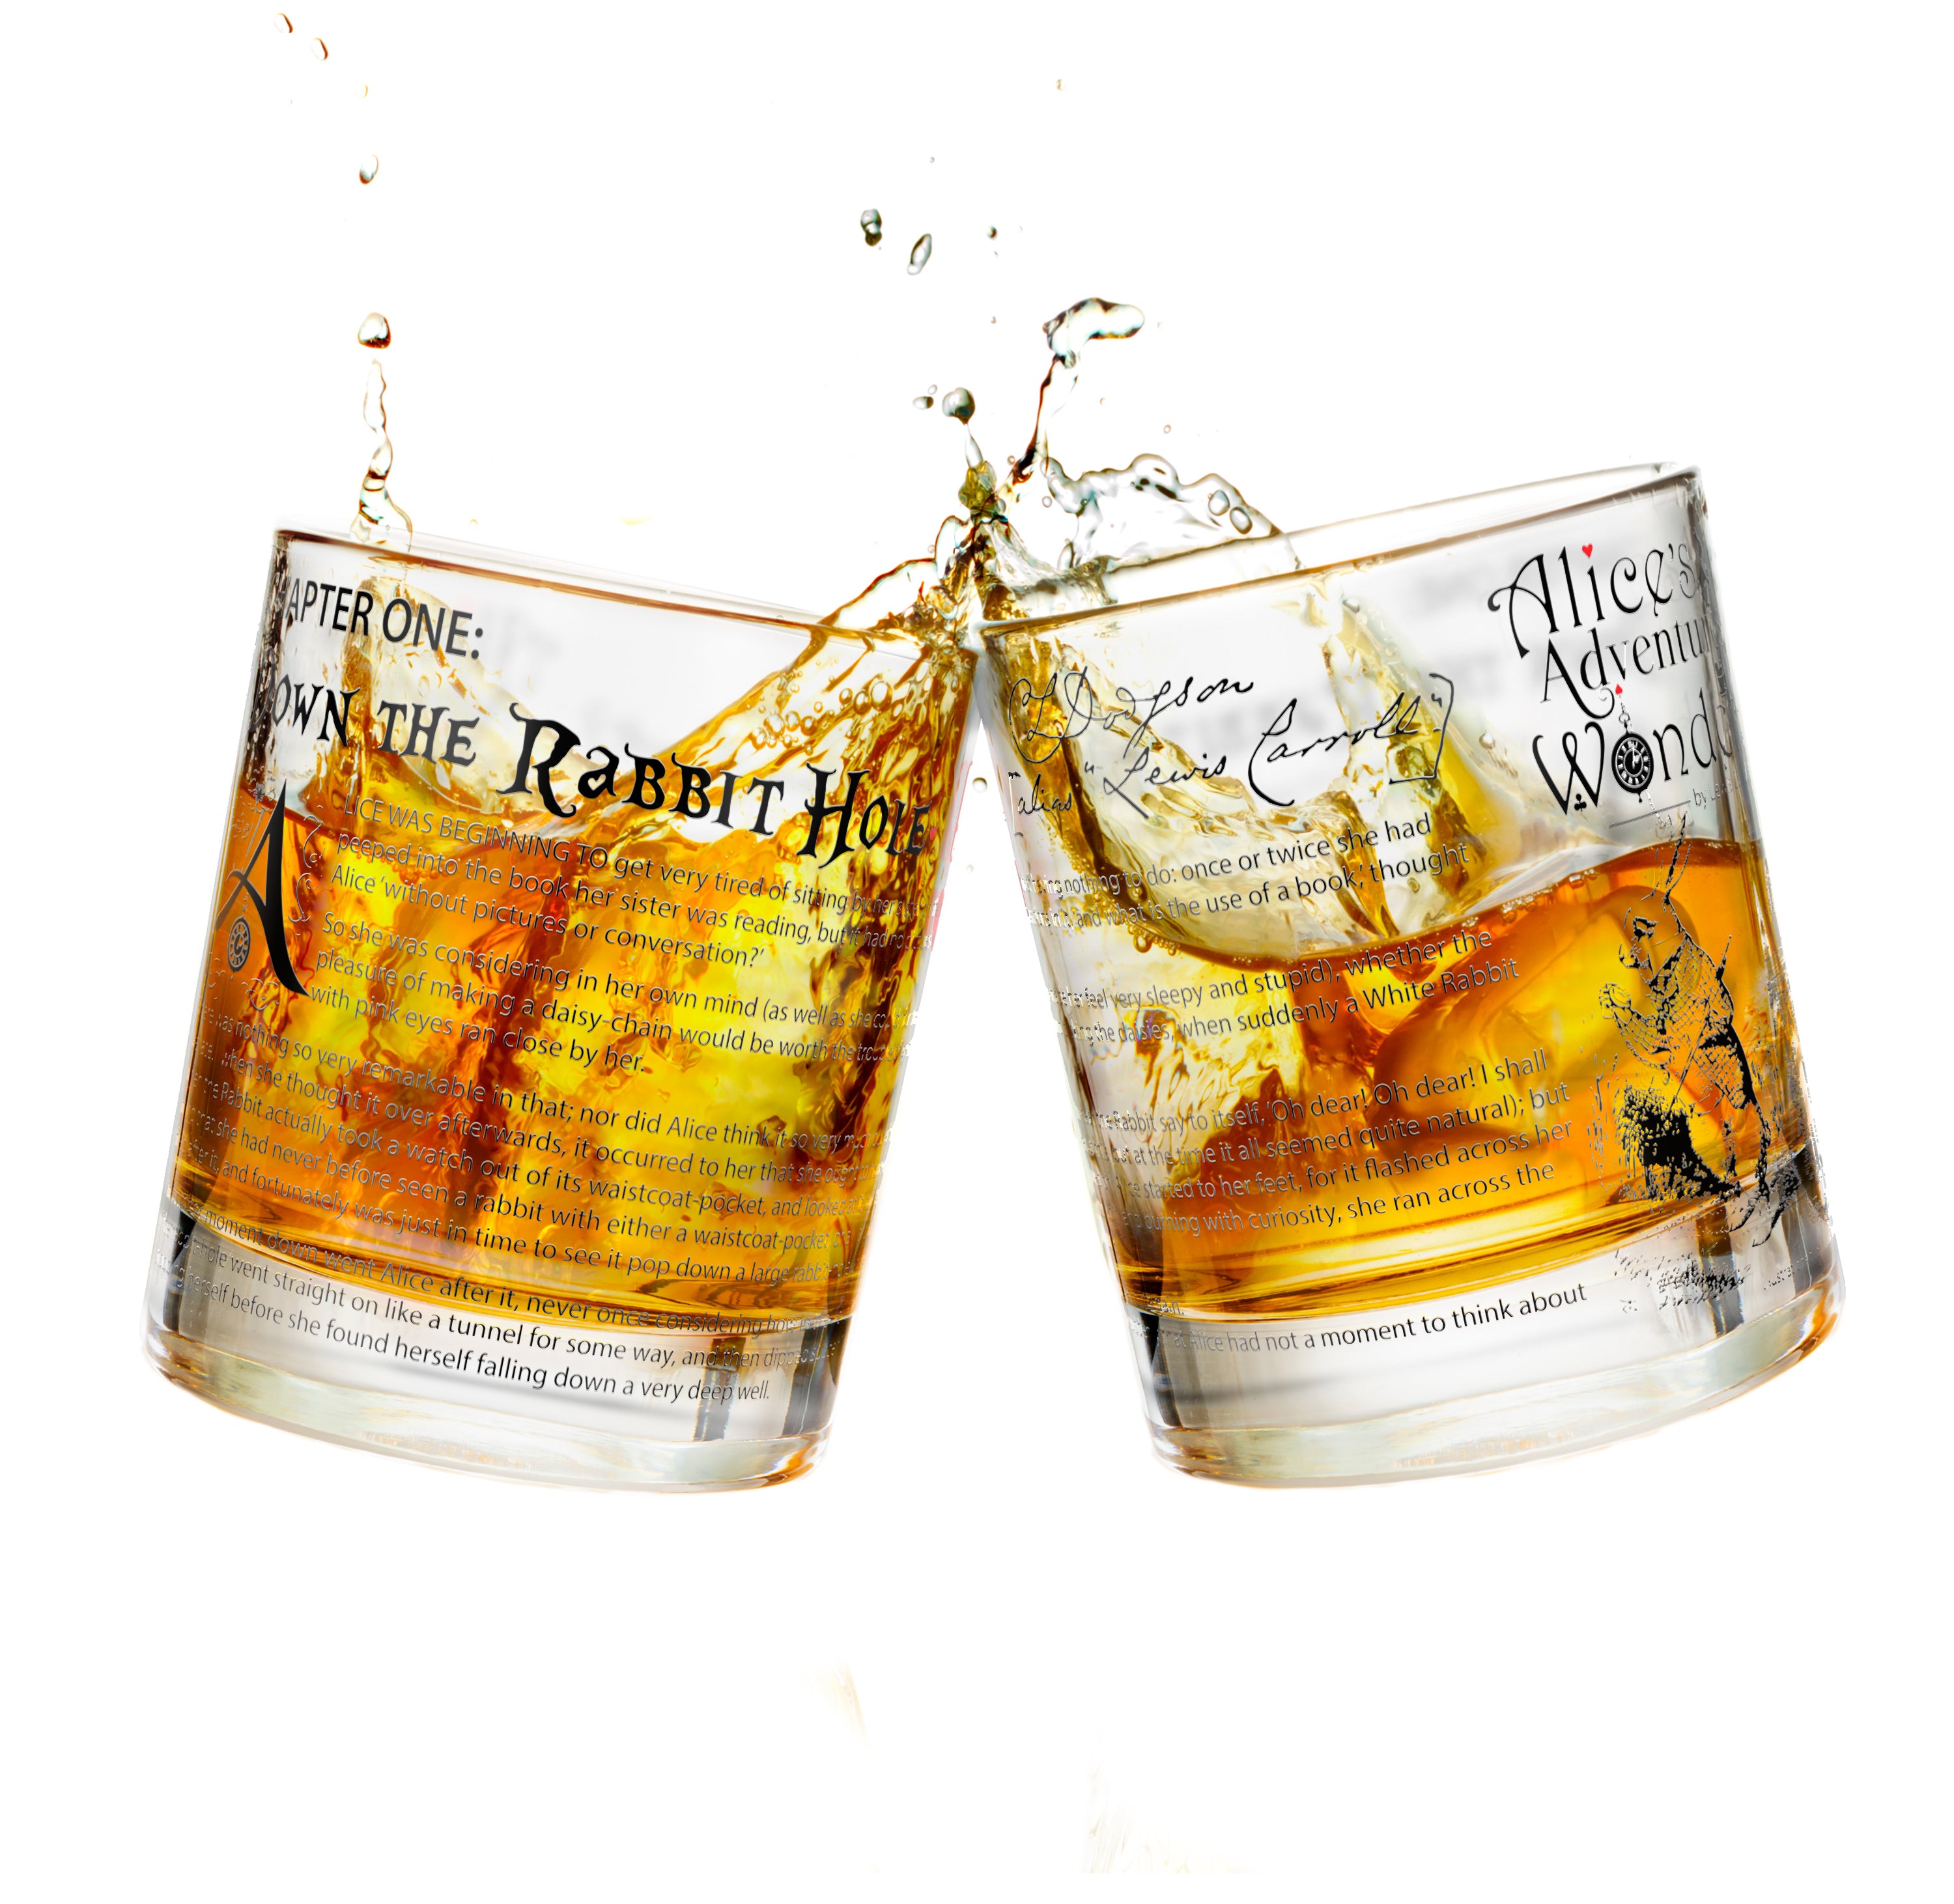 Greenline Goods Whiskey Glasses - Alice in Wonderland (Set of 2) |  Literature Rocks Glass with Lewis Carroll Book Images & Writing